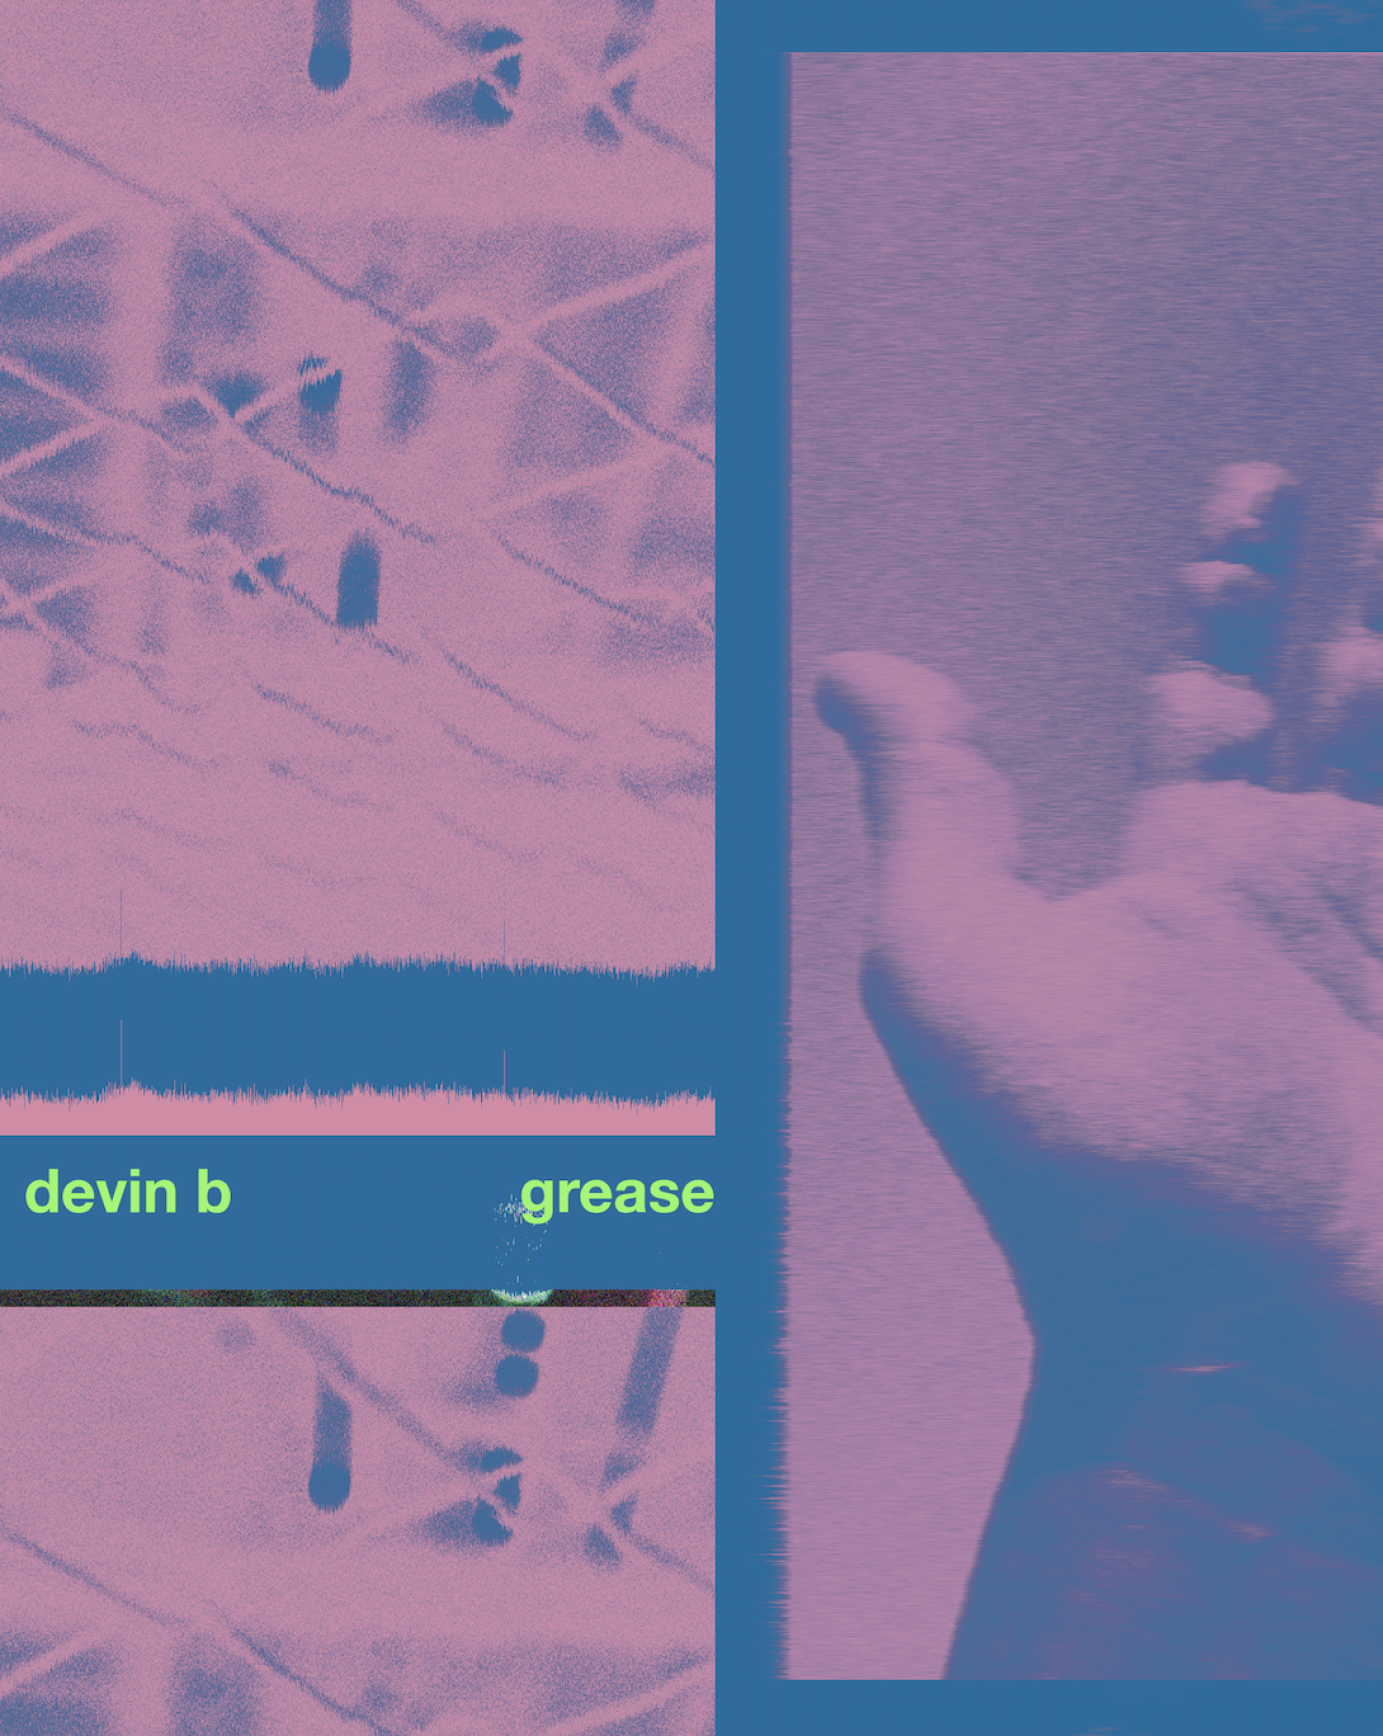 devin b - "grease" cover